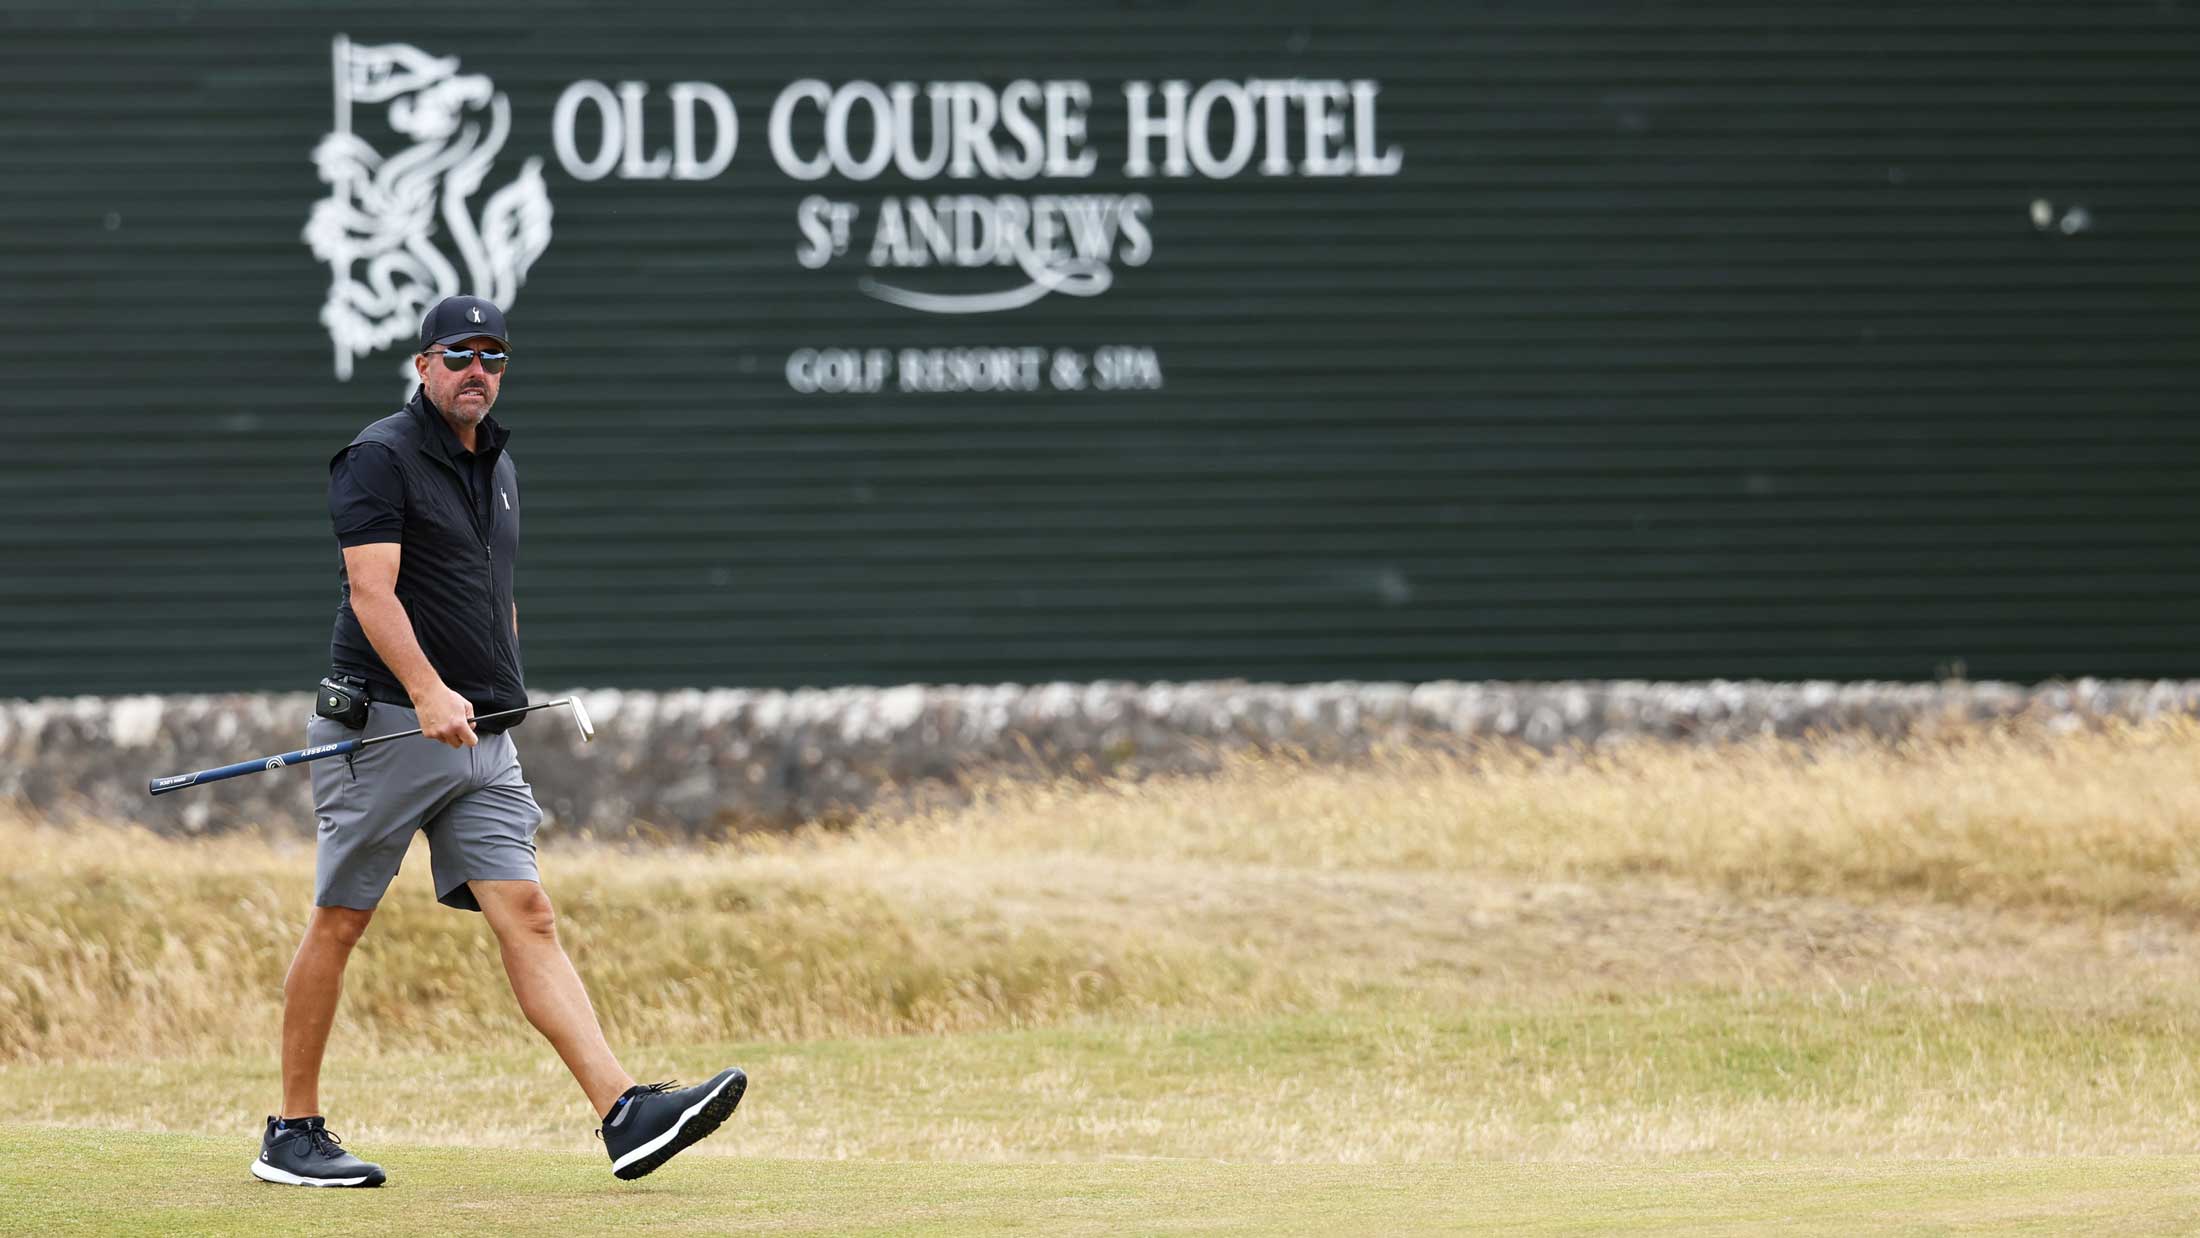 Phil Mickelson of the United States attends a practice session ahead of the 150th Open at St Andrews Old Course on July 12, 2022 in St Andrews, Scotland.